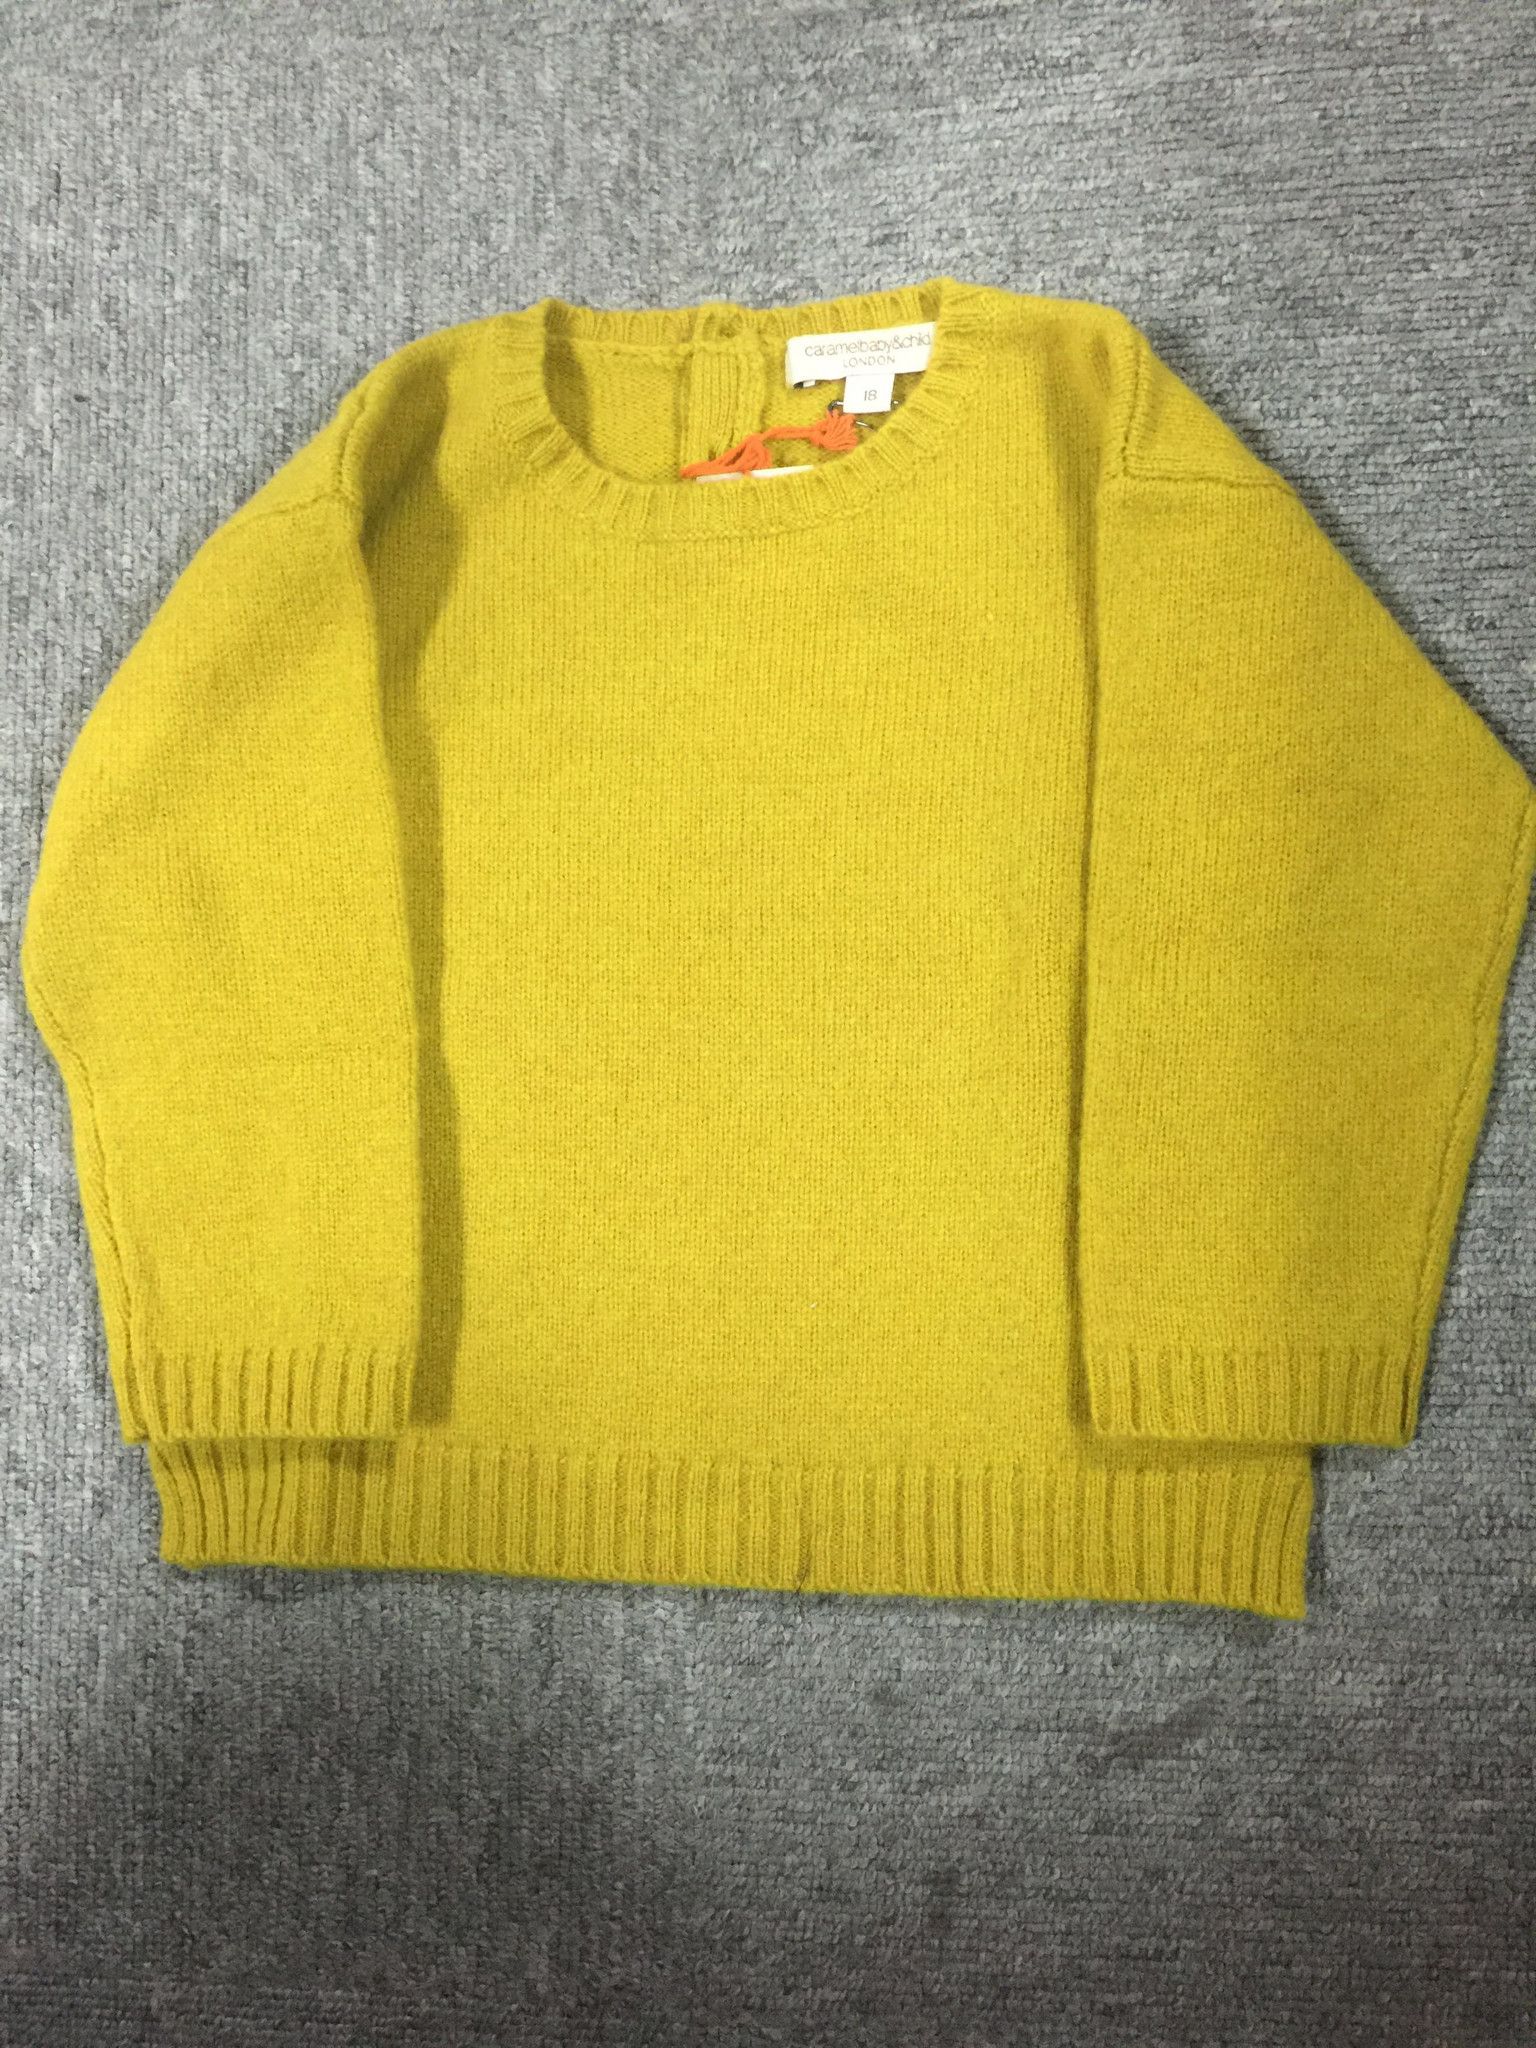 Boys Yellow Knitted Wool Sweater With Ribben Cuffs - CÉMAROSE | Children's Fashion Store